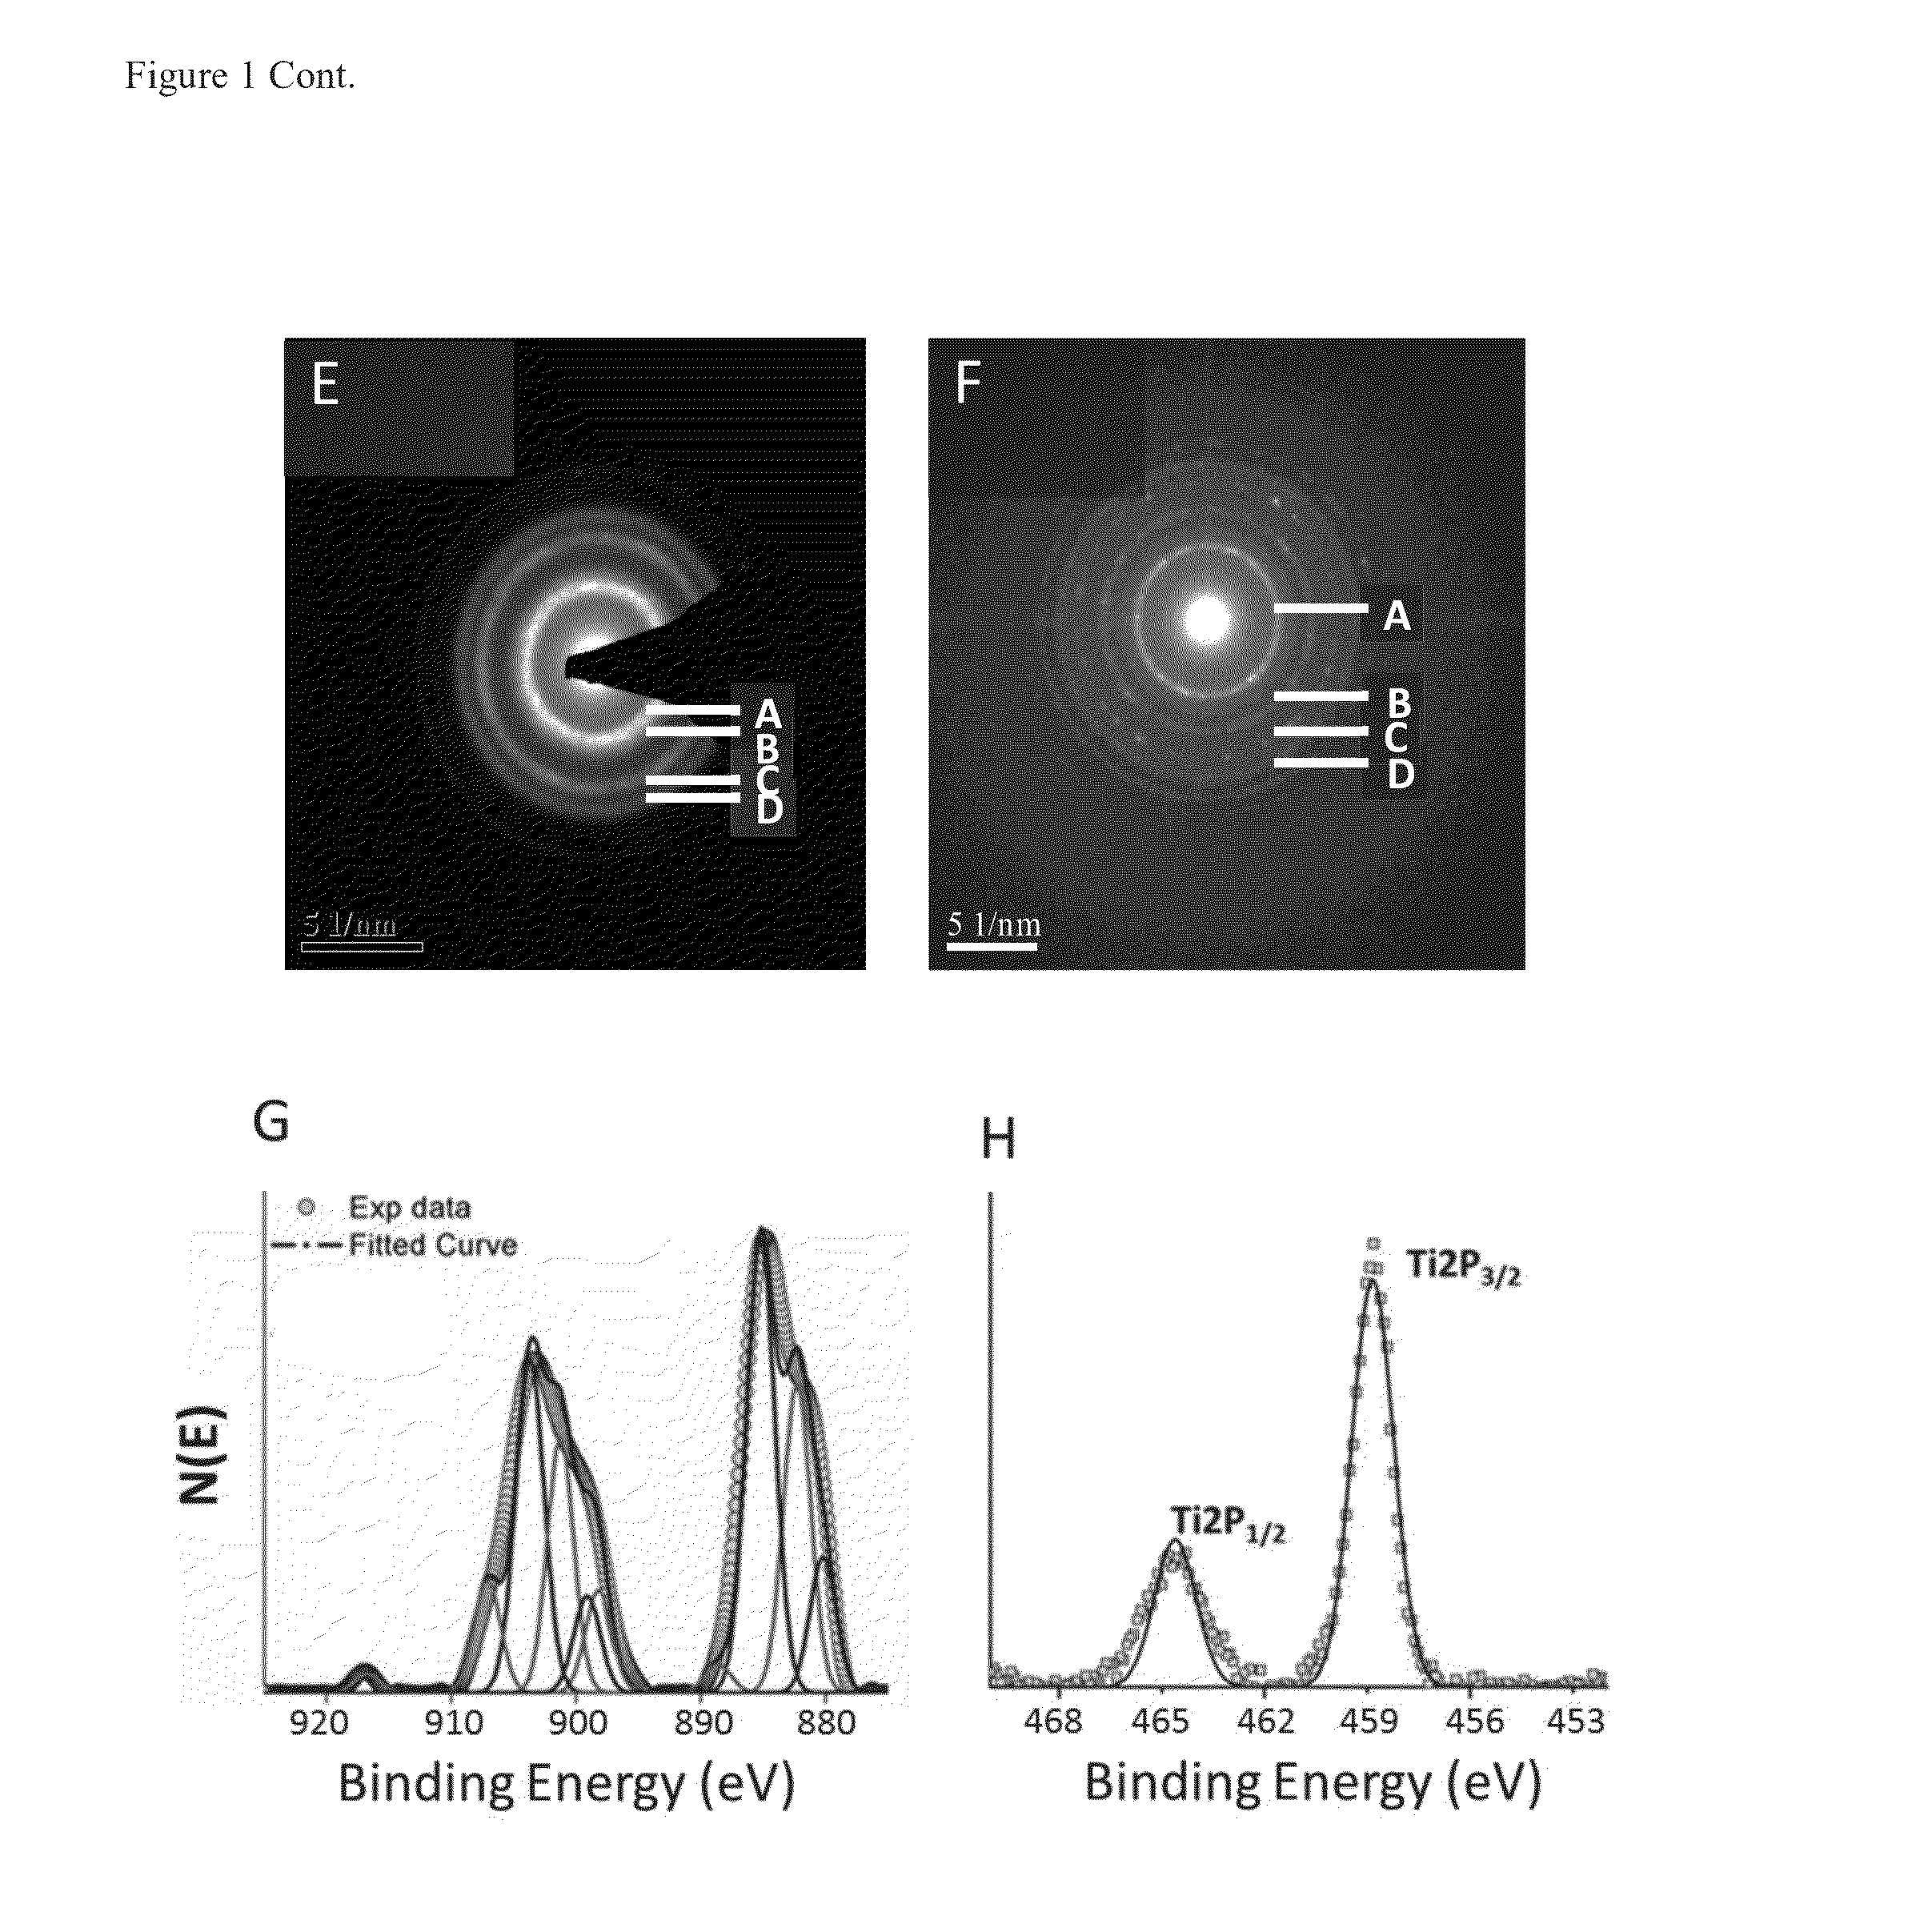 Methods of using ceo2 and tio2 nanoparticles in modulation of the immune system